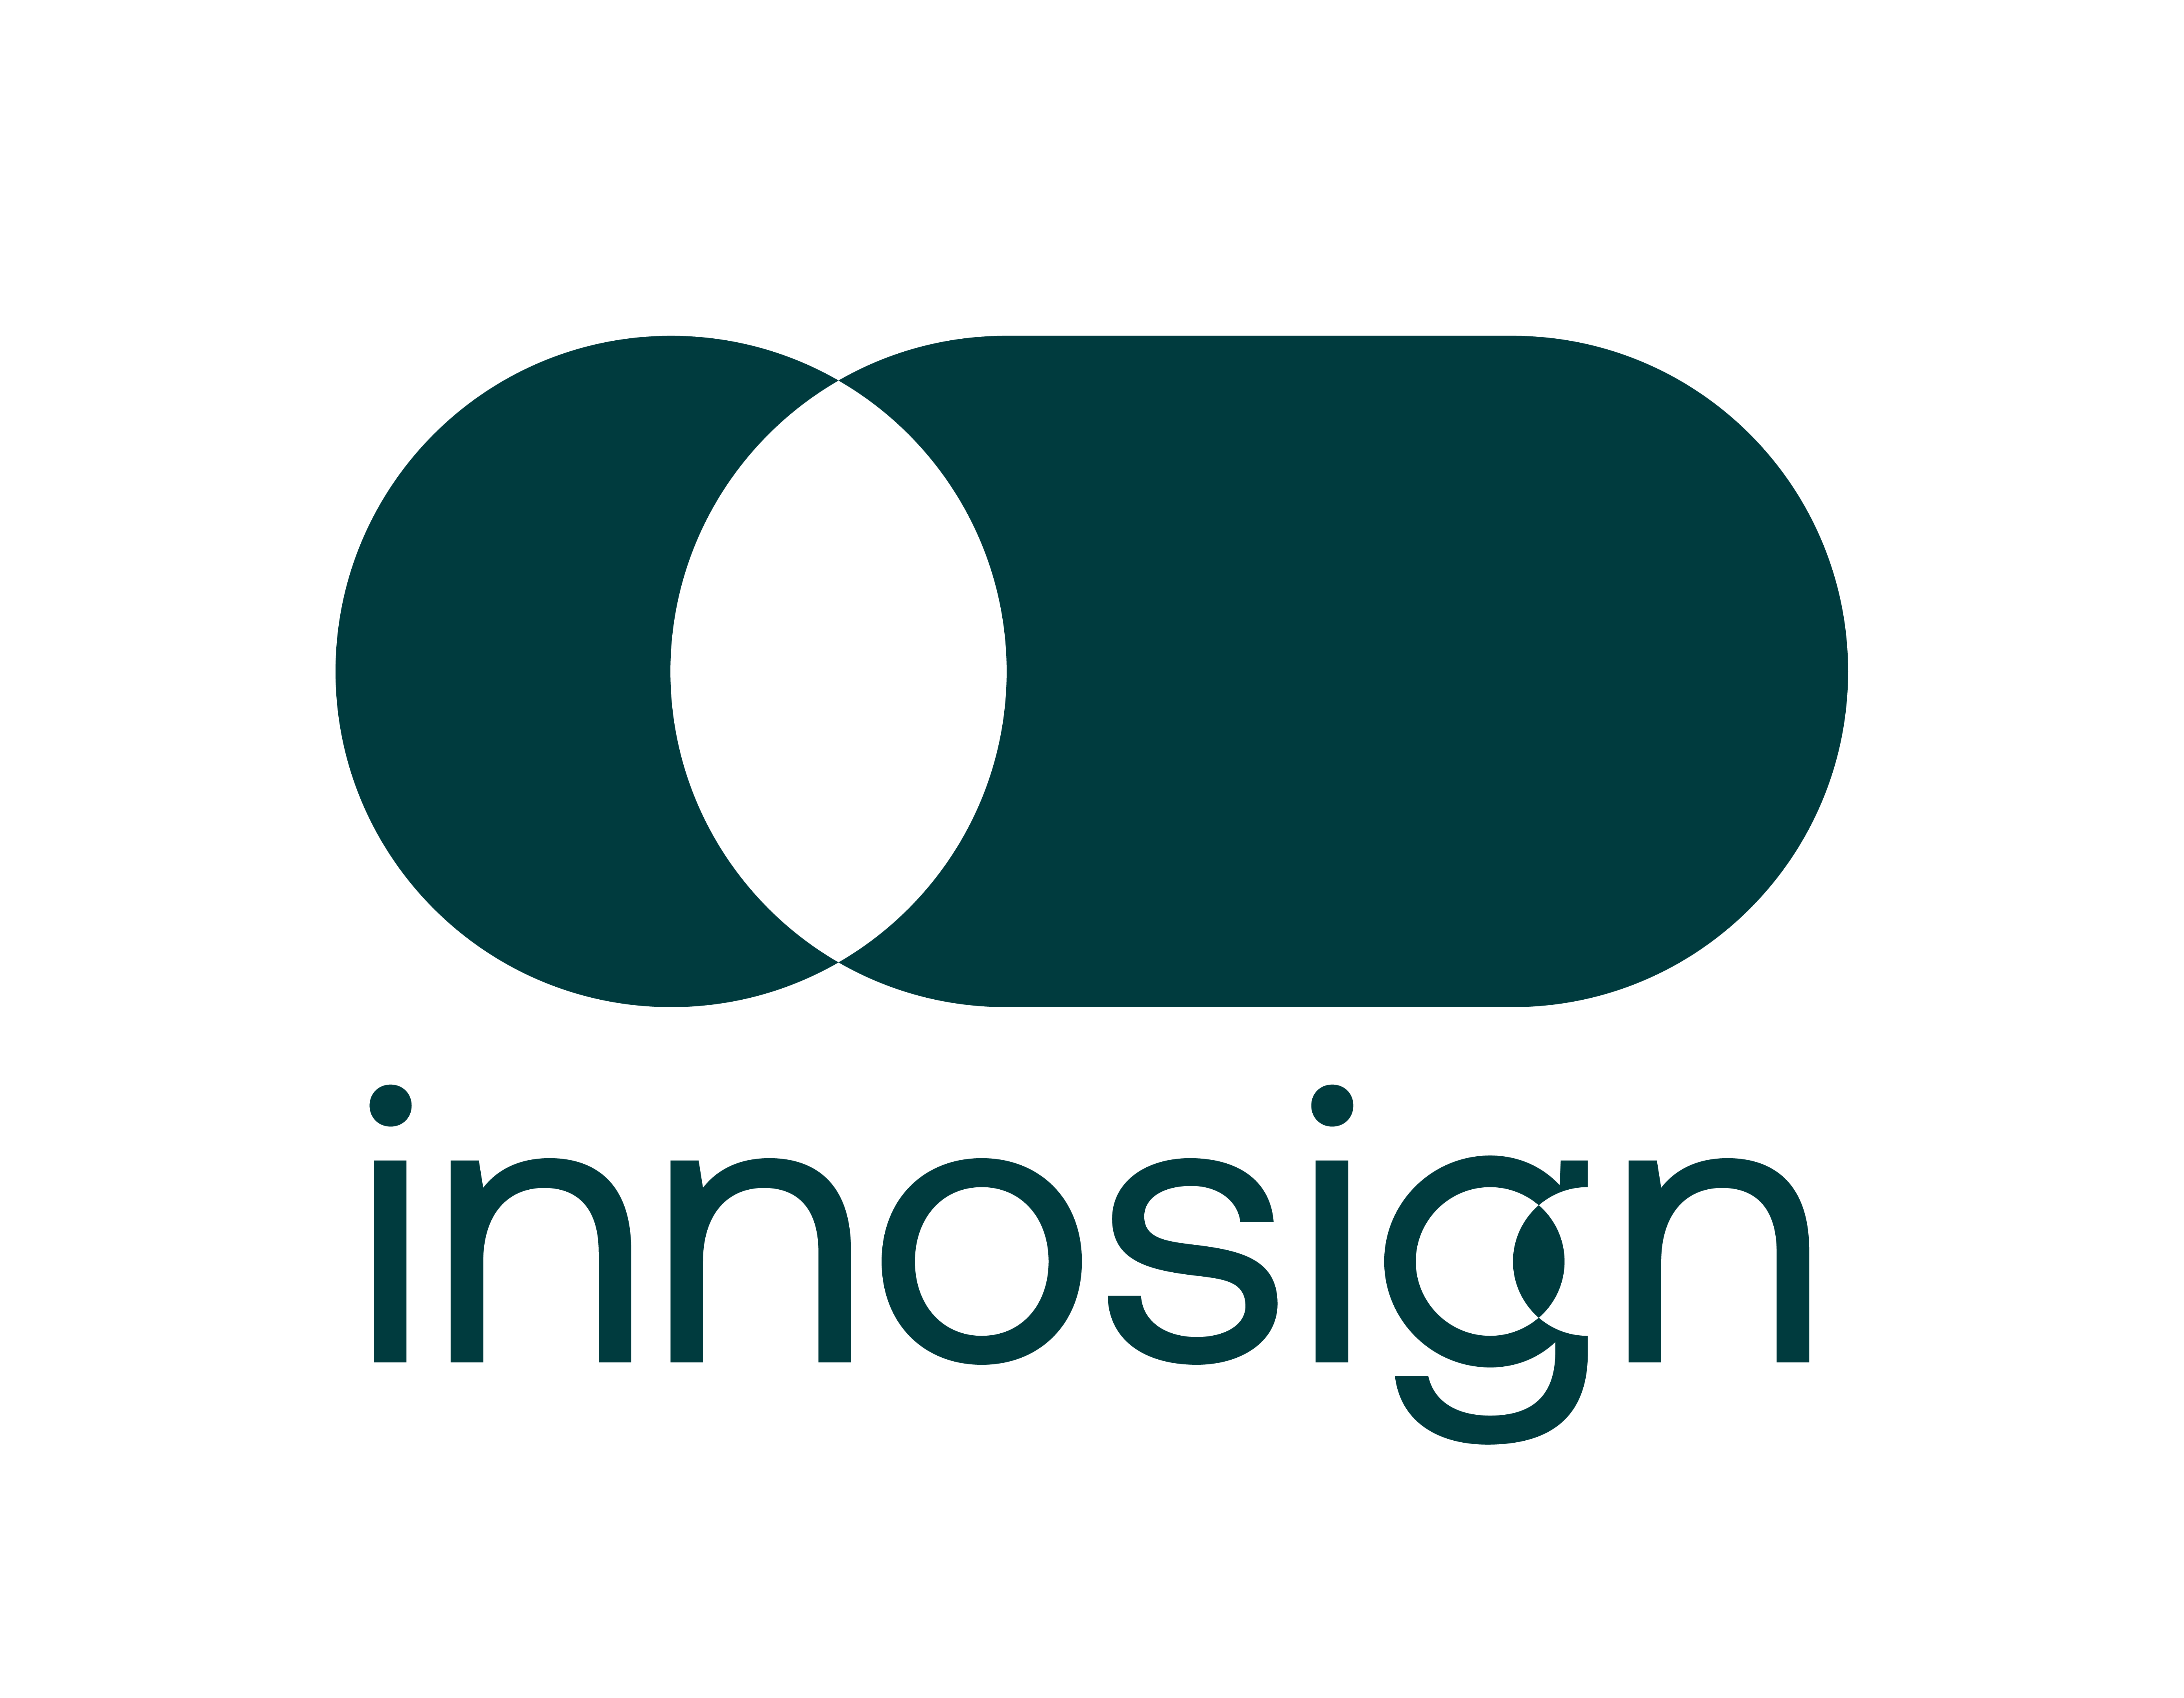 A1_INNOSIGN_LOGO_GREEN.png